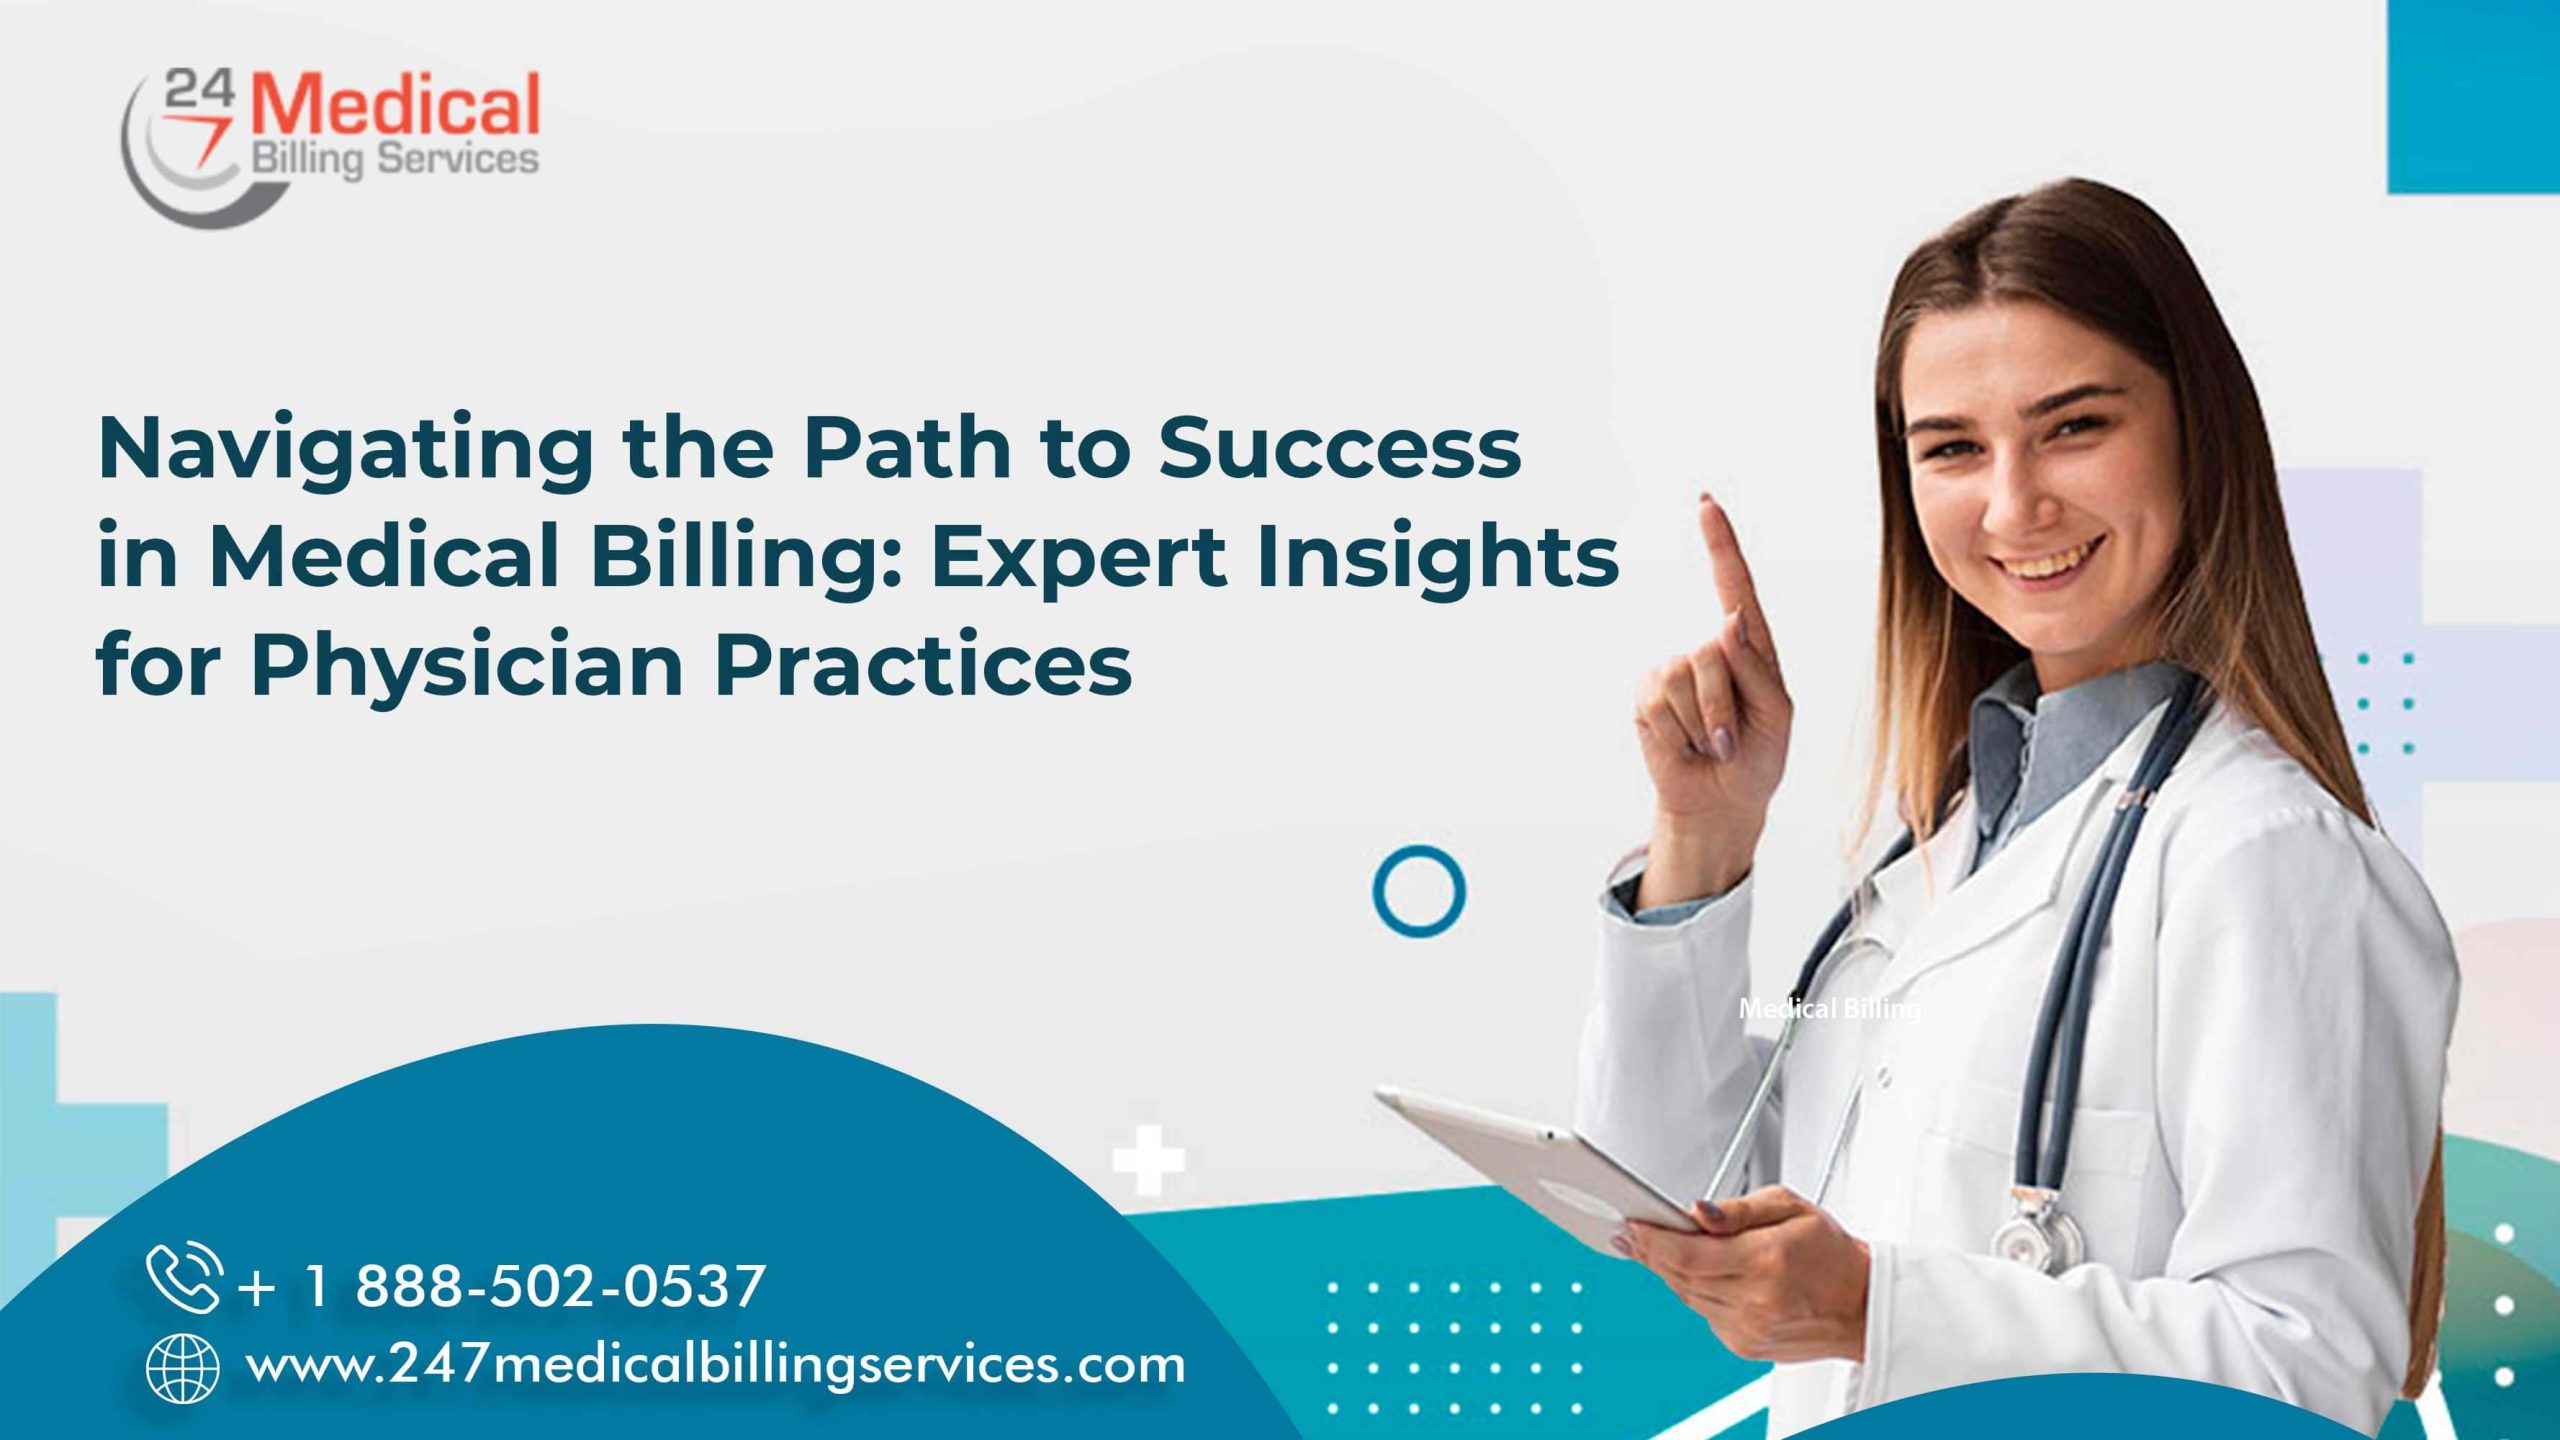  Navigating the Path to Success in Medical Billing: Expert Insights for Physician Practices